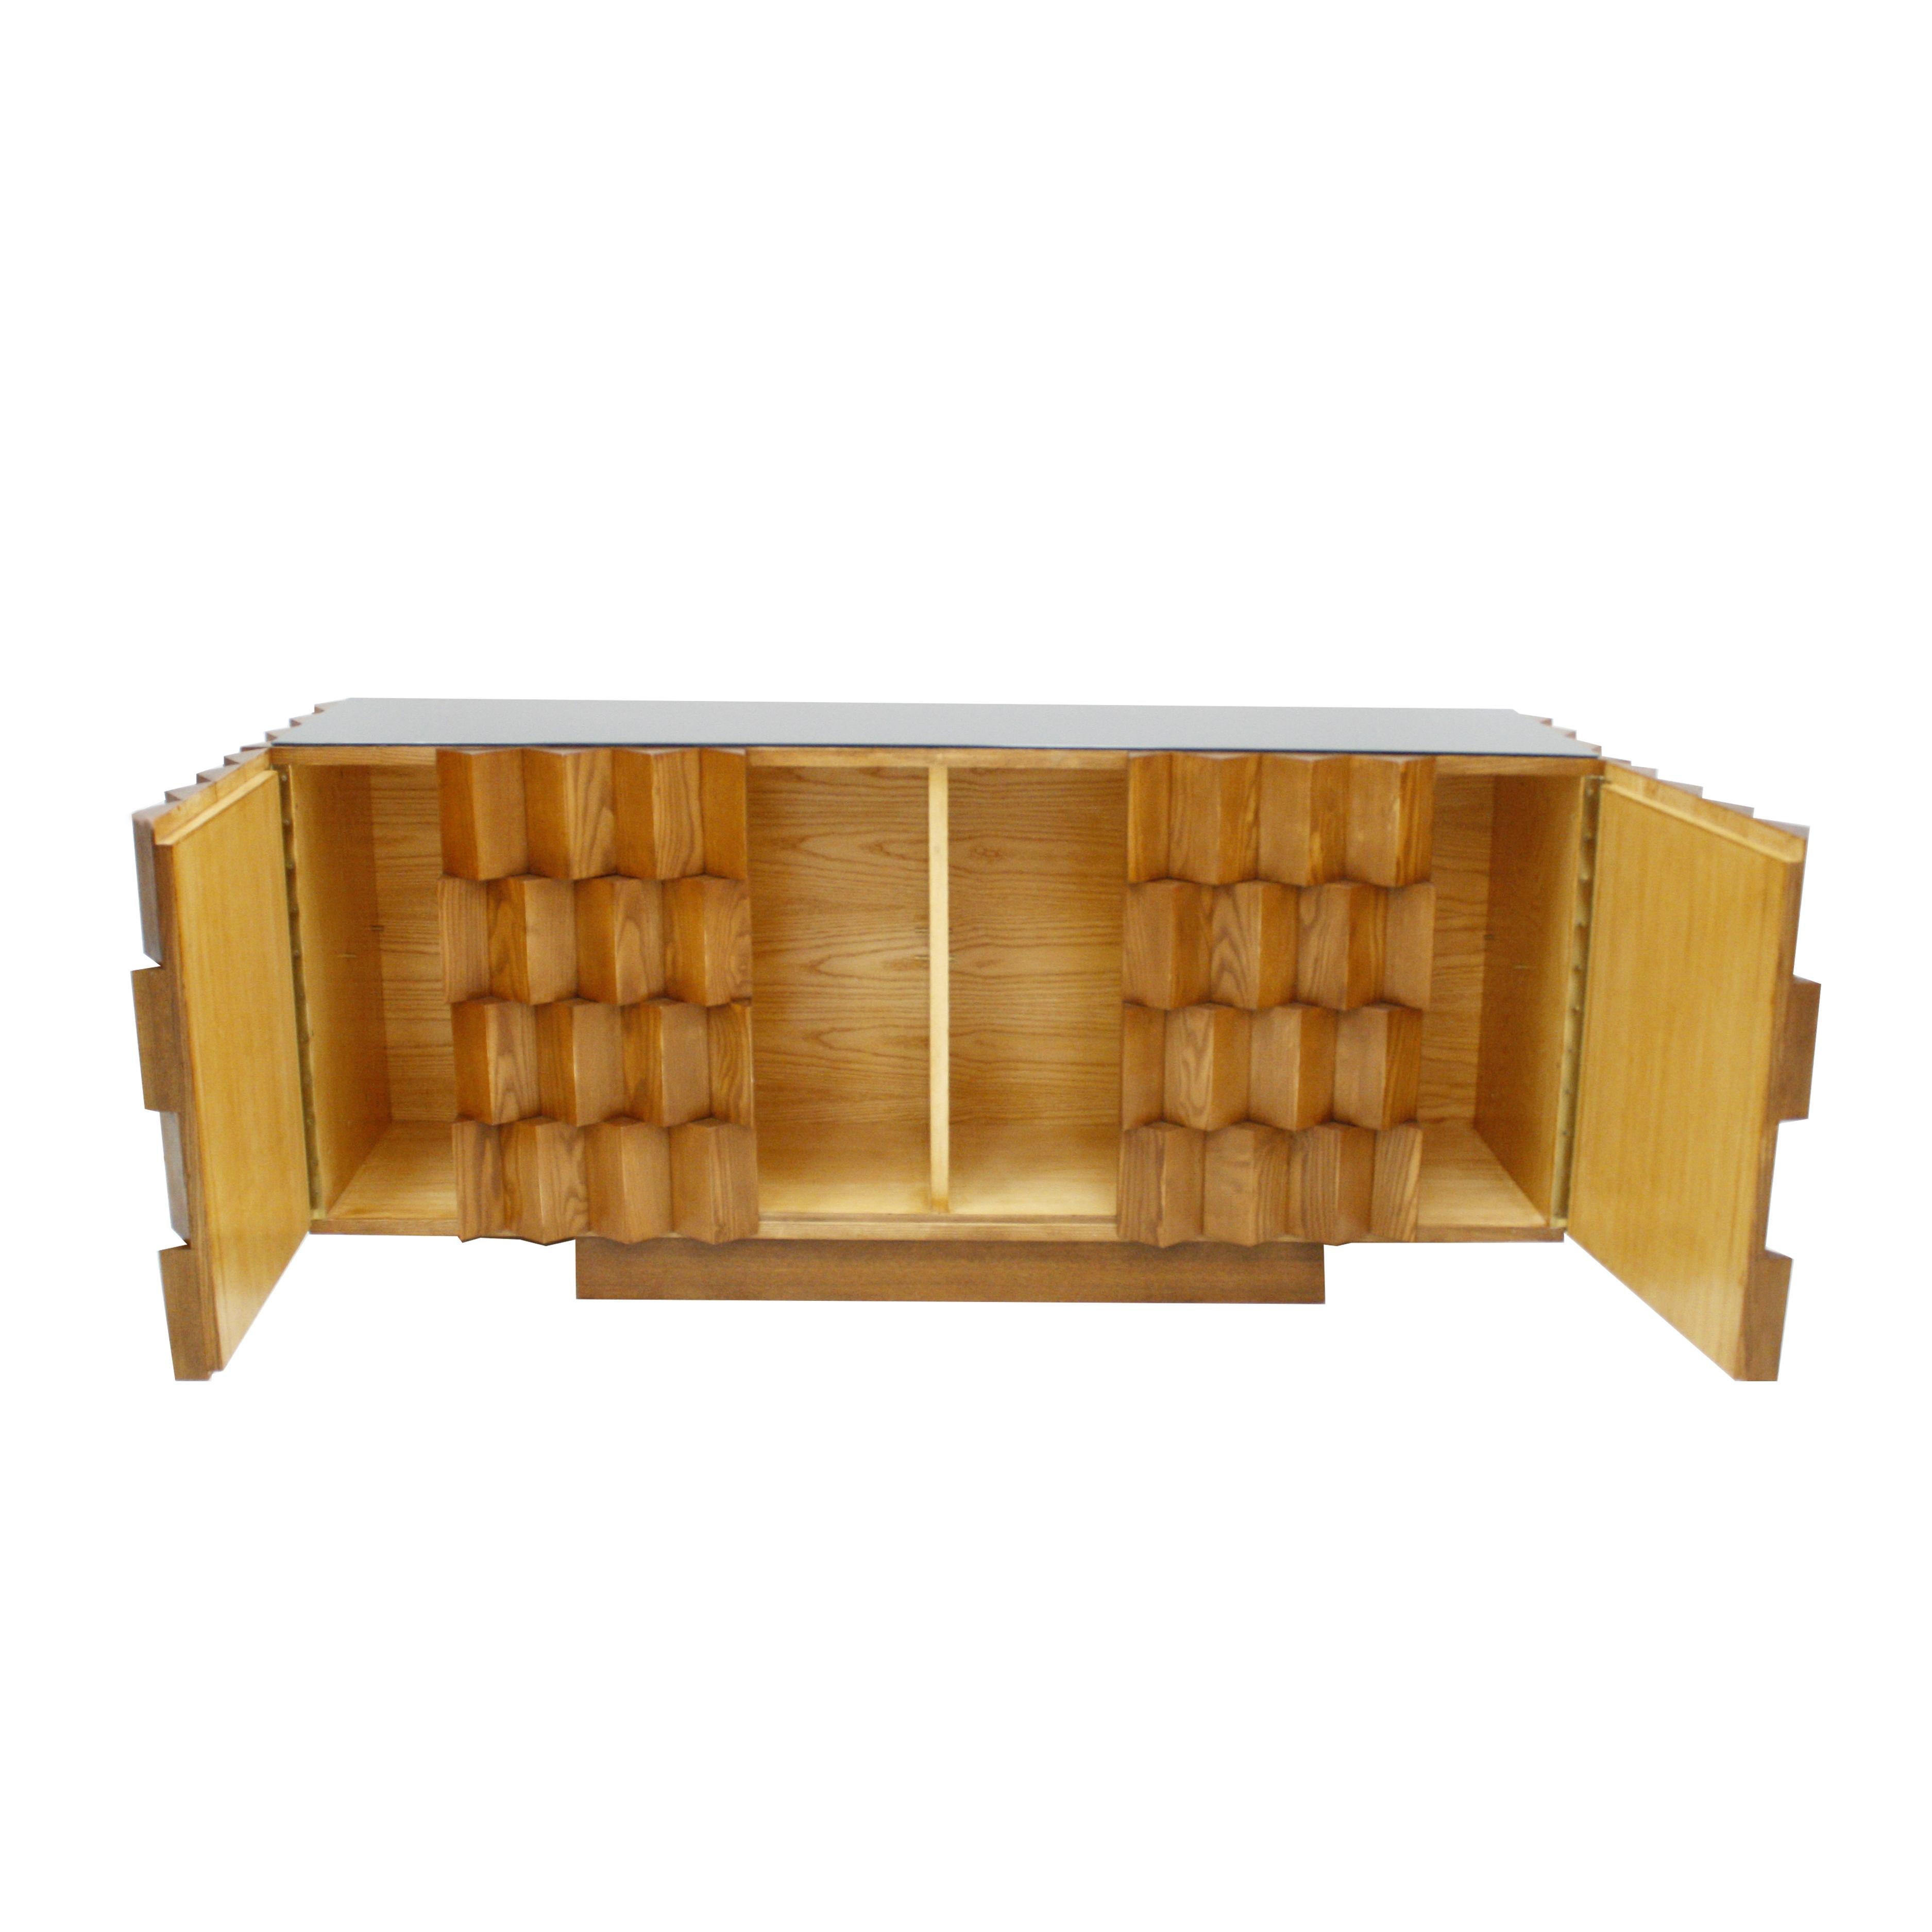 Contemporary Mid-Century Modern Style Oak Wood and Black Glass Italian Sideboard